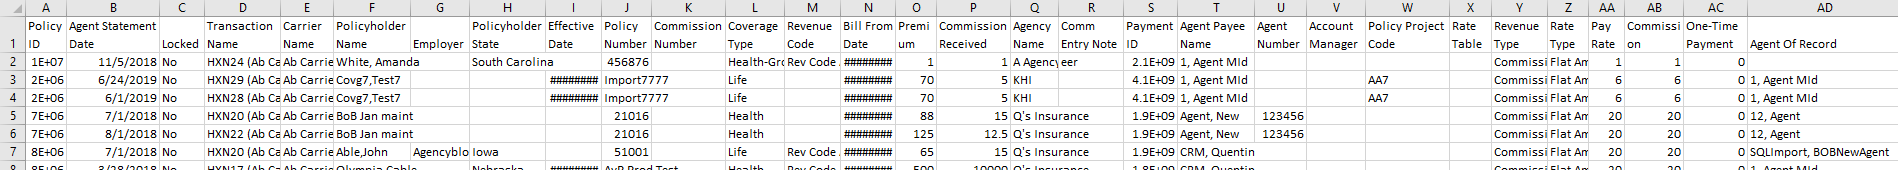 Screenshot showing an example of the Commission Payments report output